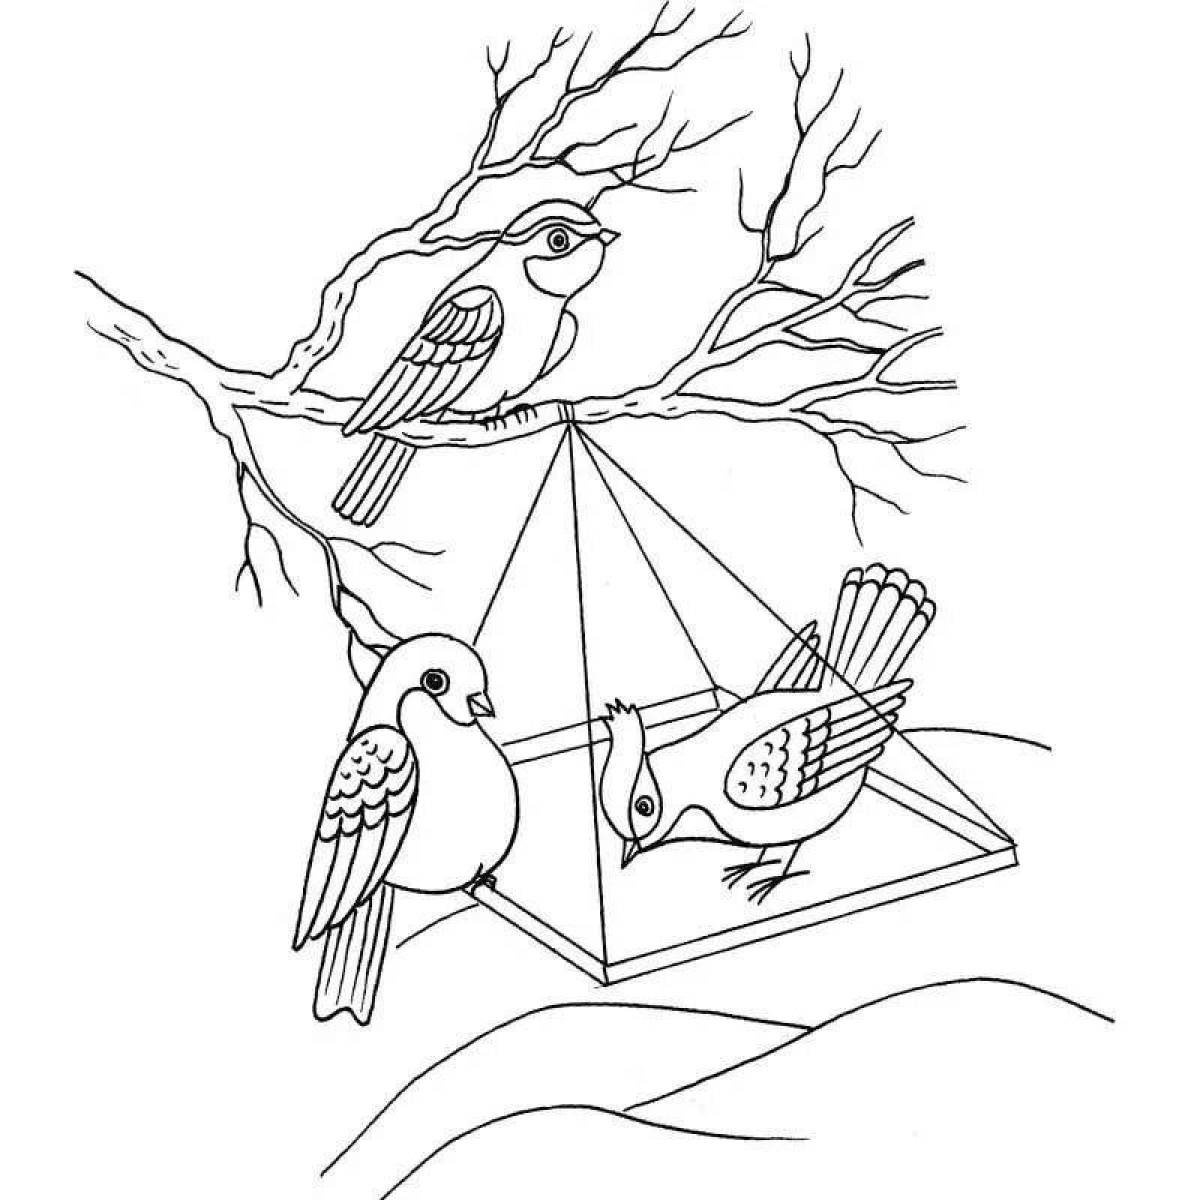 Animated coloring pages of wintering birds